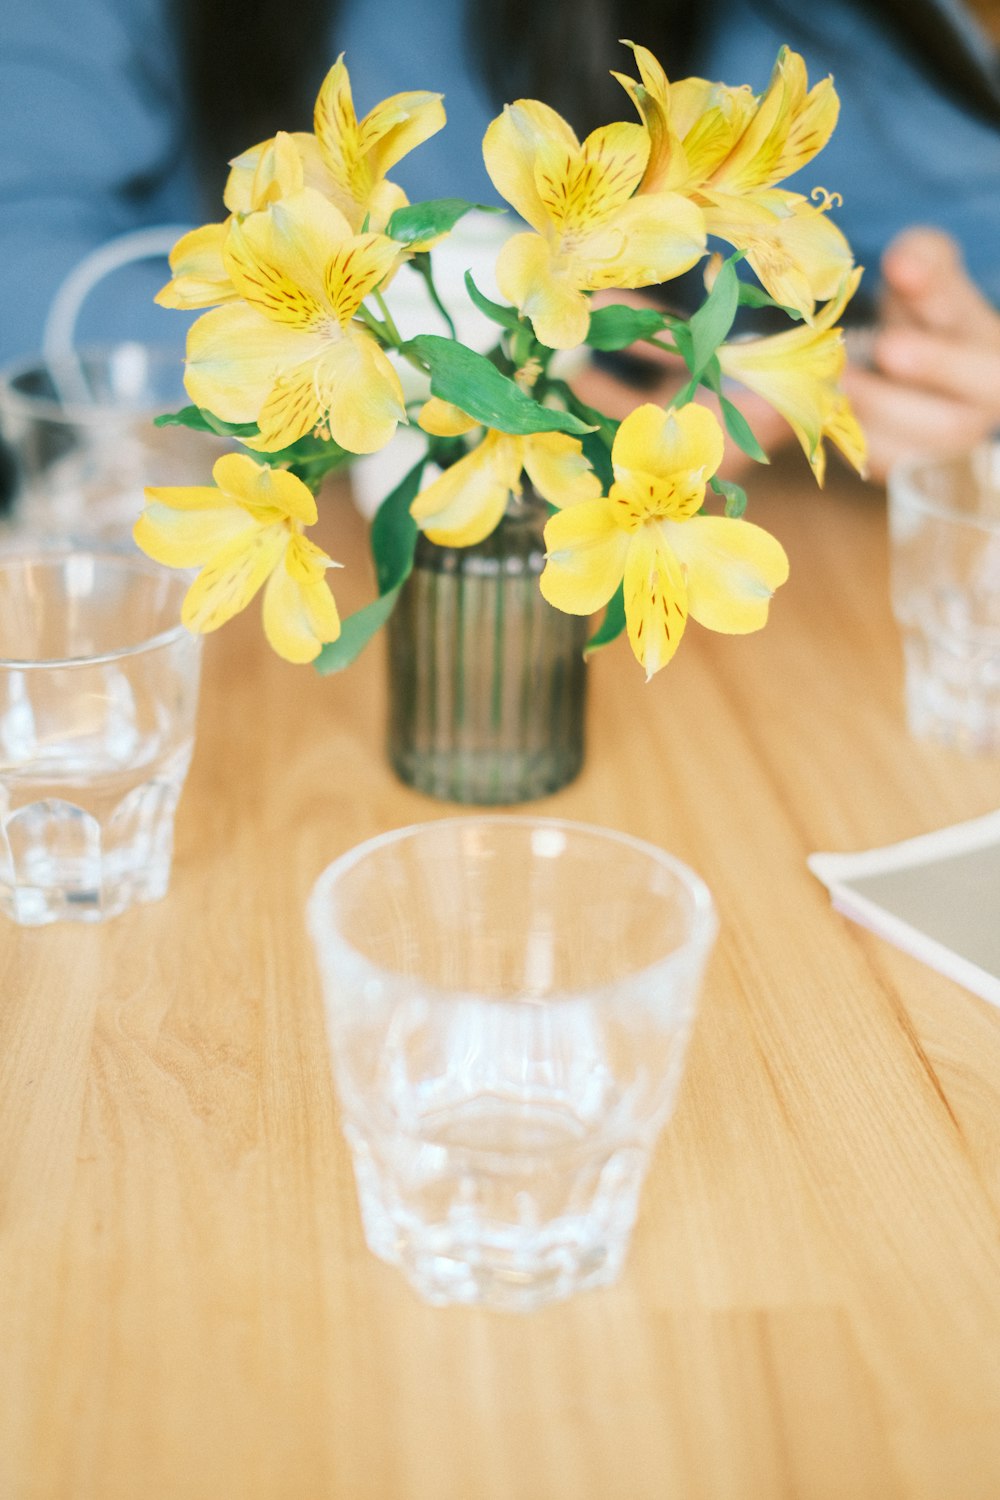 a vase with yellow flowers on a wooden table